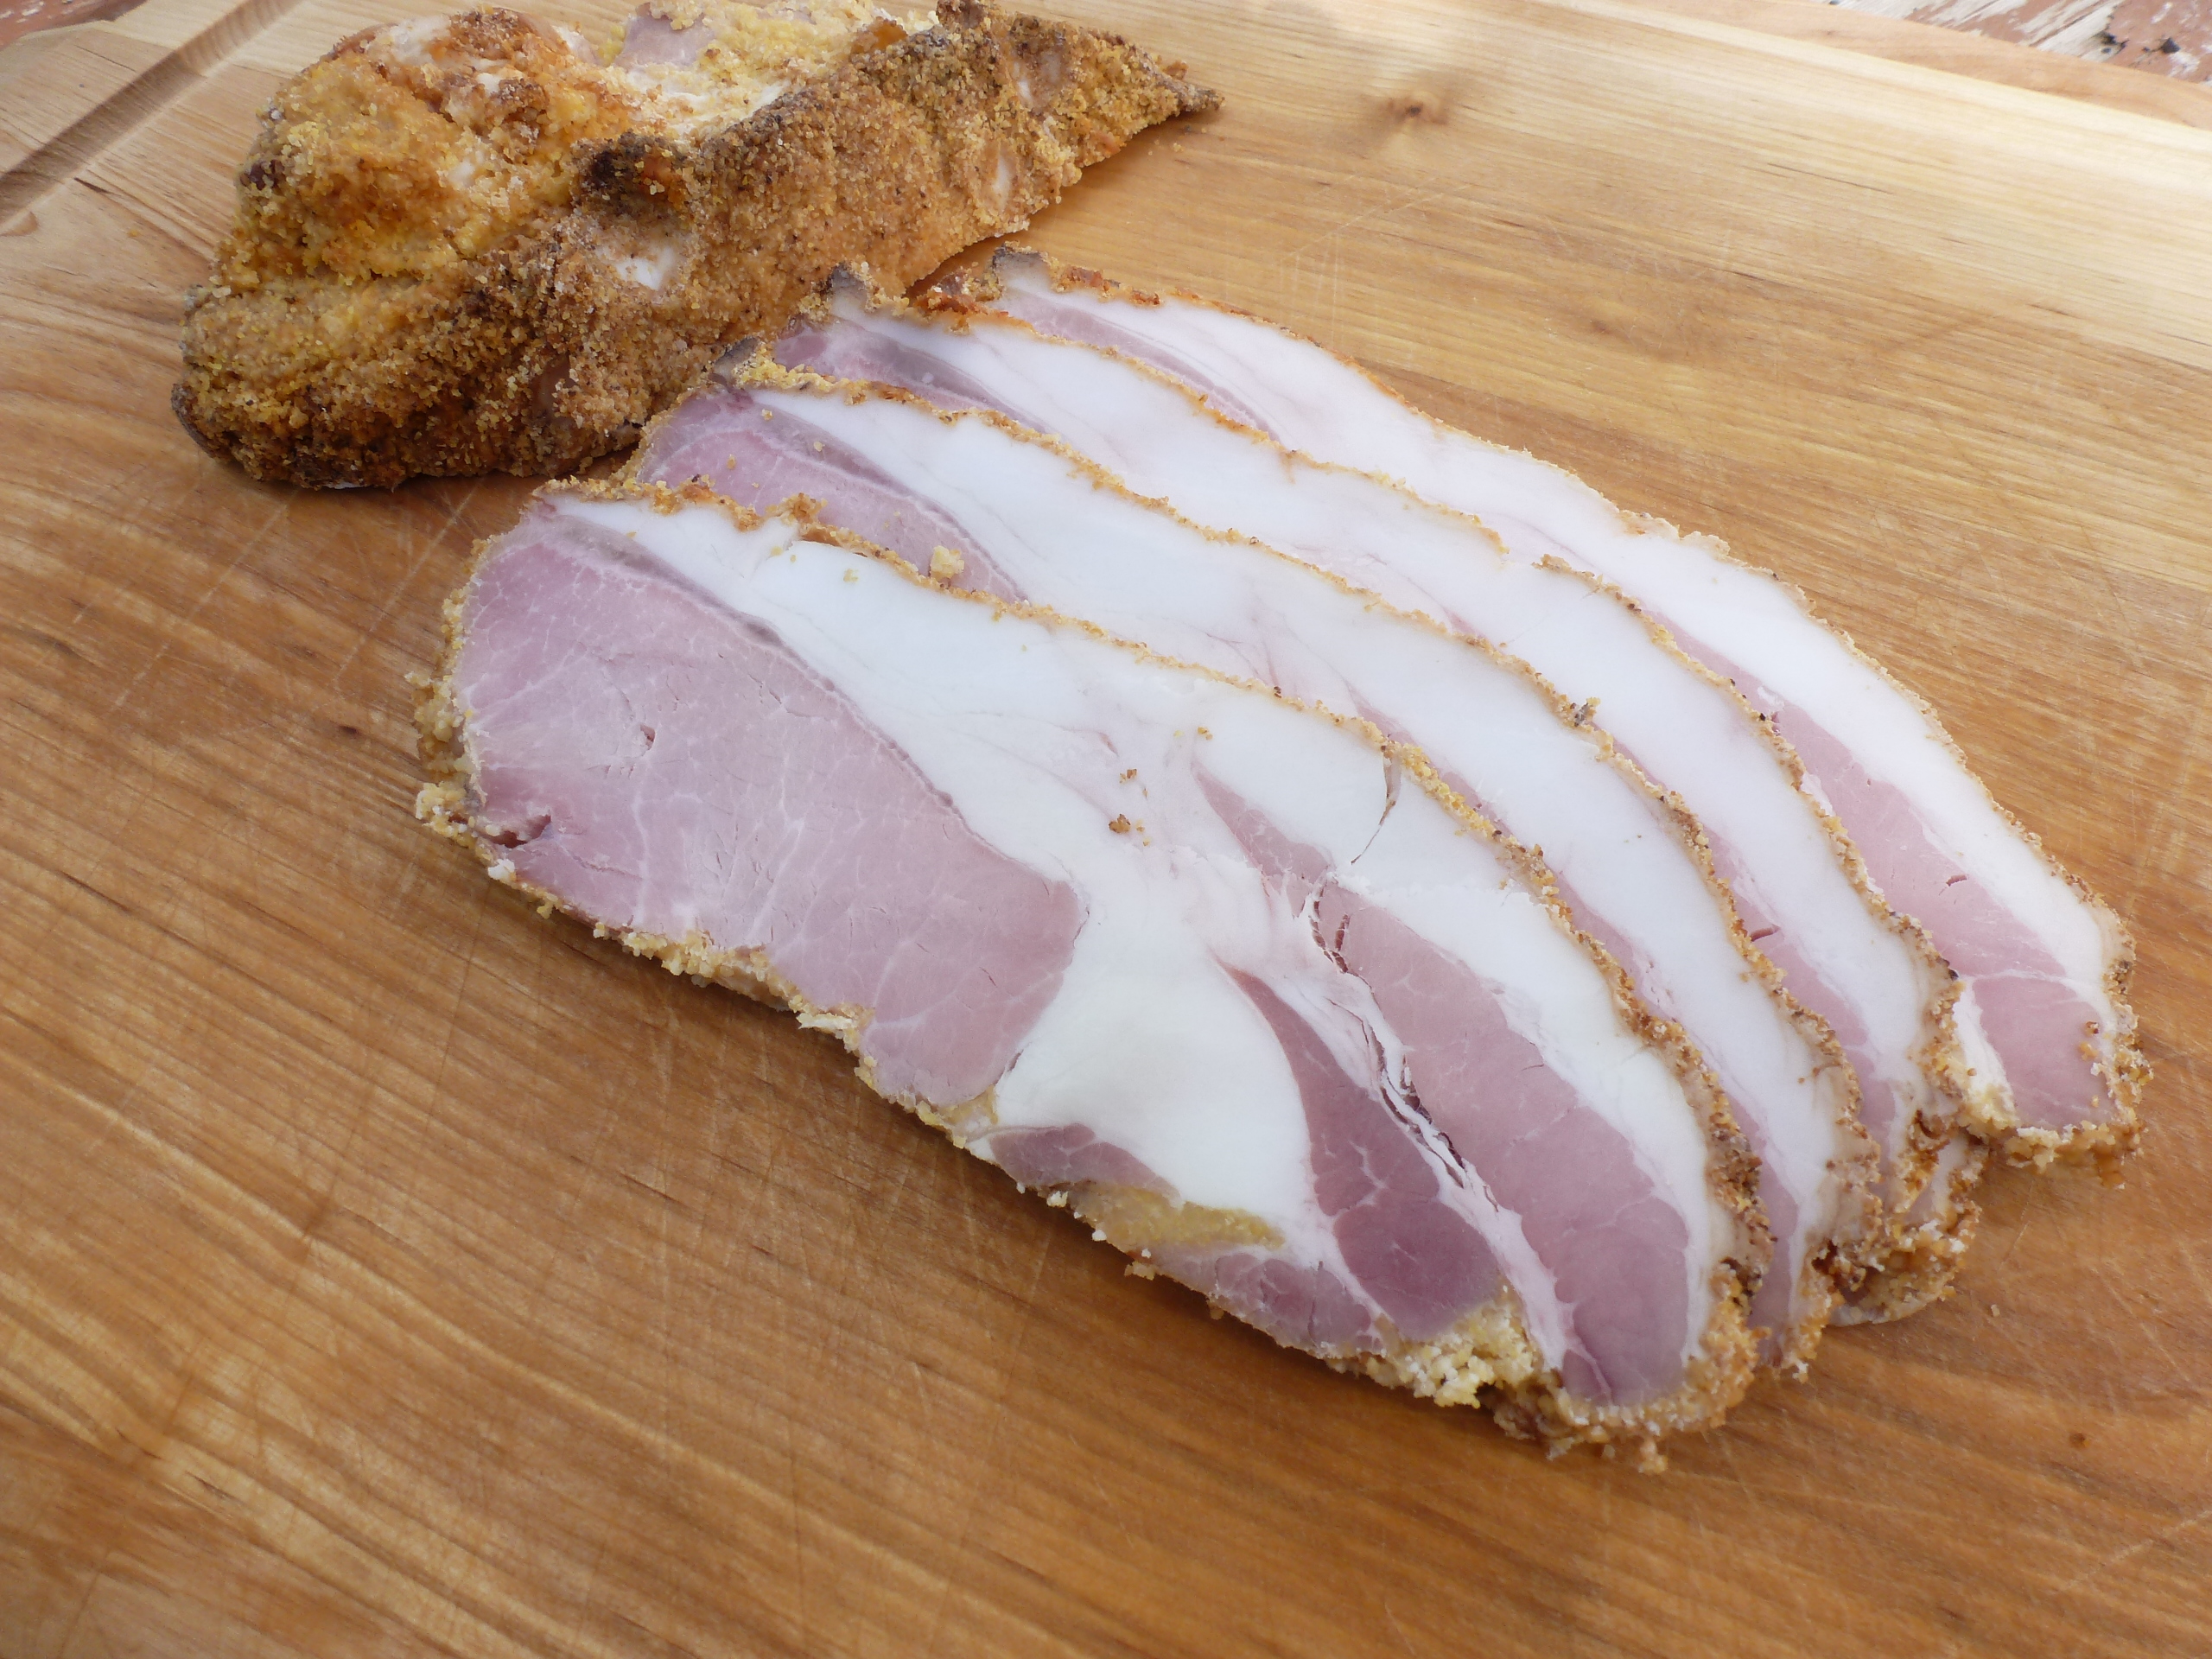 Slices of homemade peameal bacon